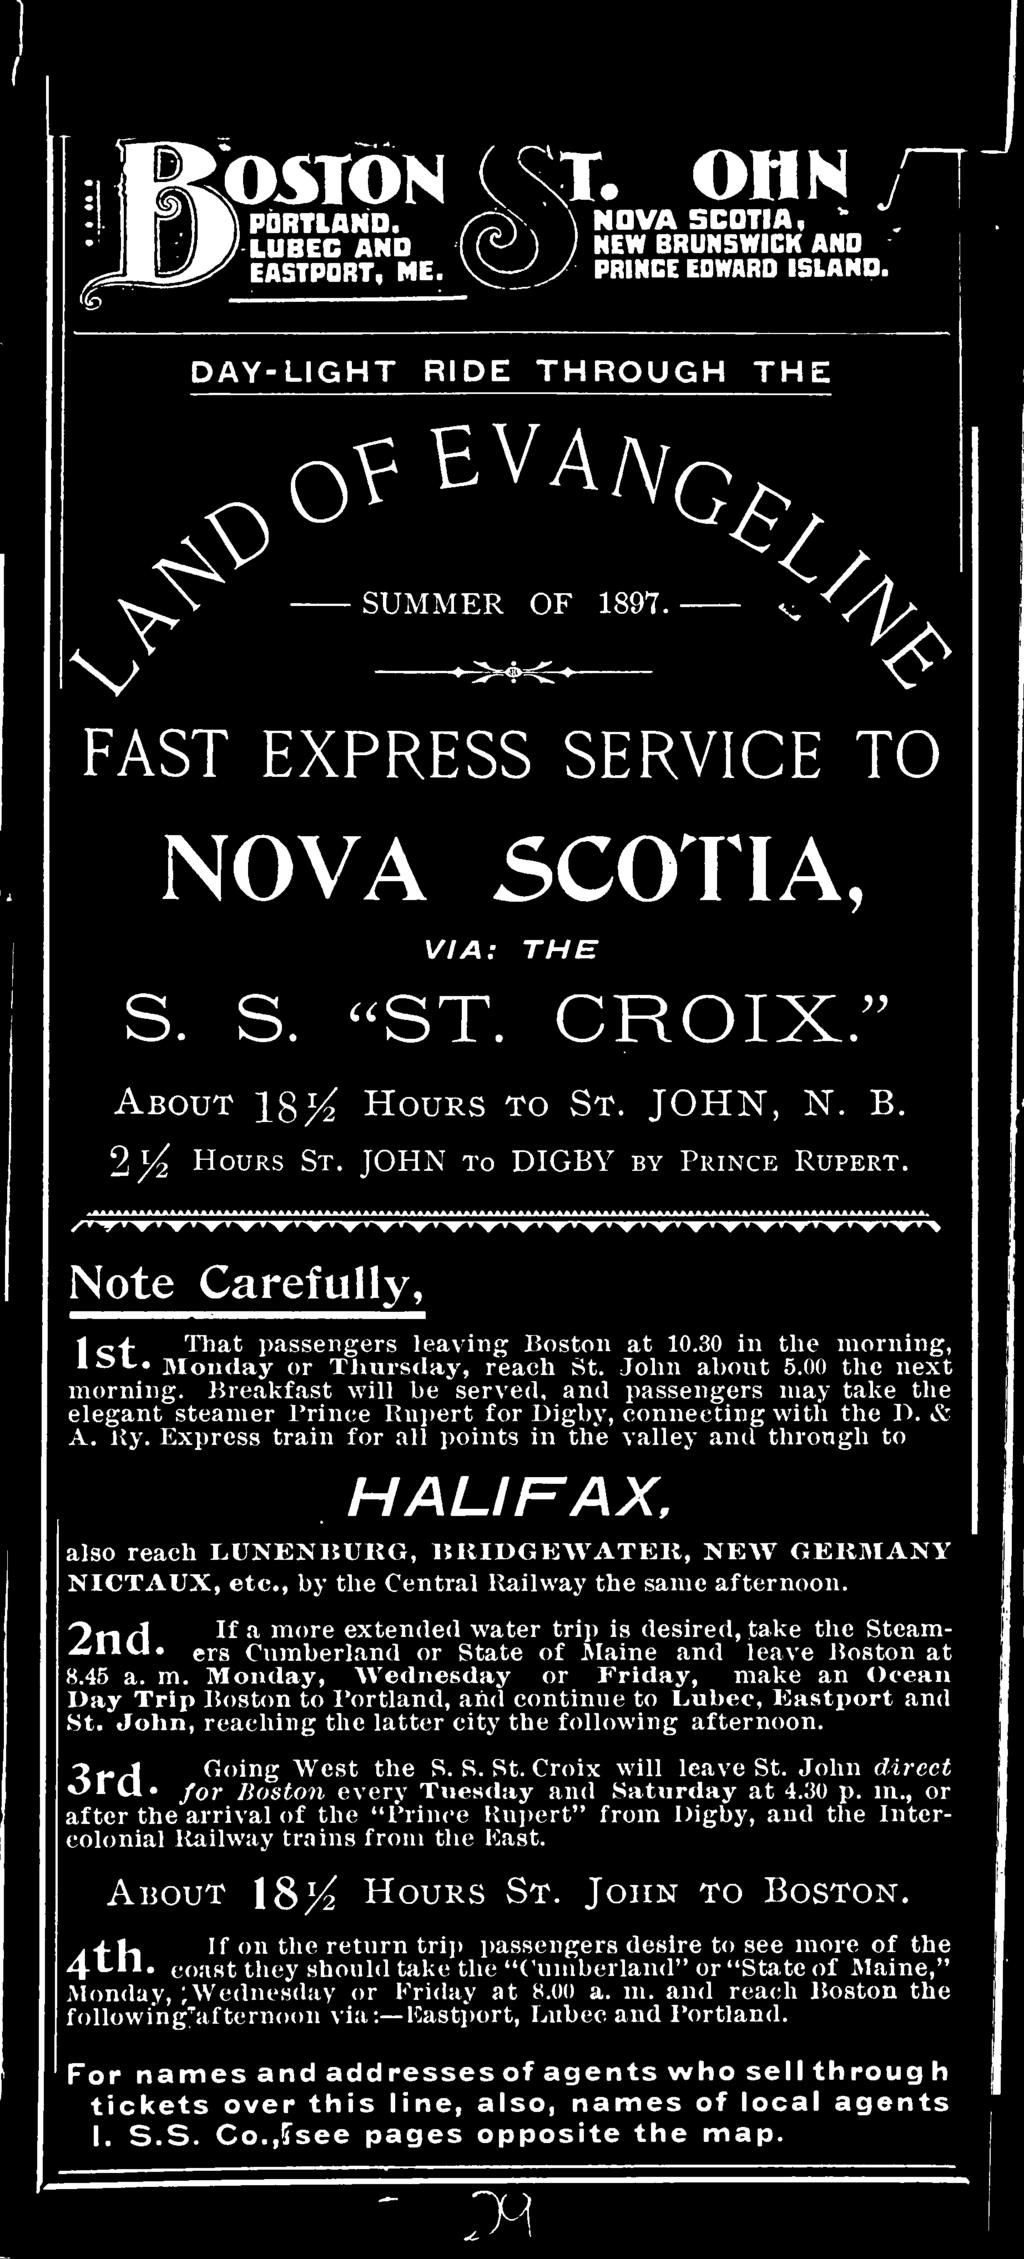 Express train for all points in the valley and through to HALIFAX, also reach LUNENBURG, BRIDGKWATER, NEW GERMANY NICTAUX, etc., by the Central Railway the same afternoon.